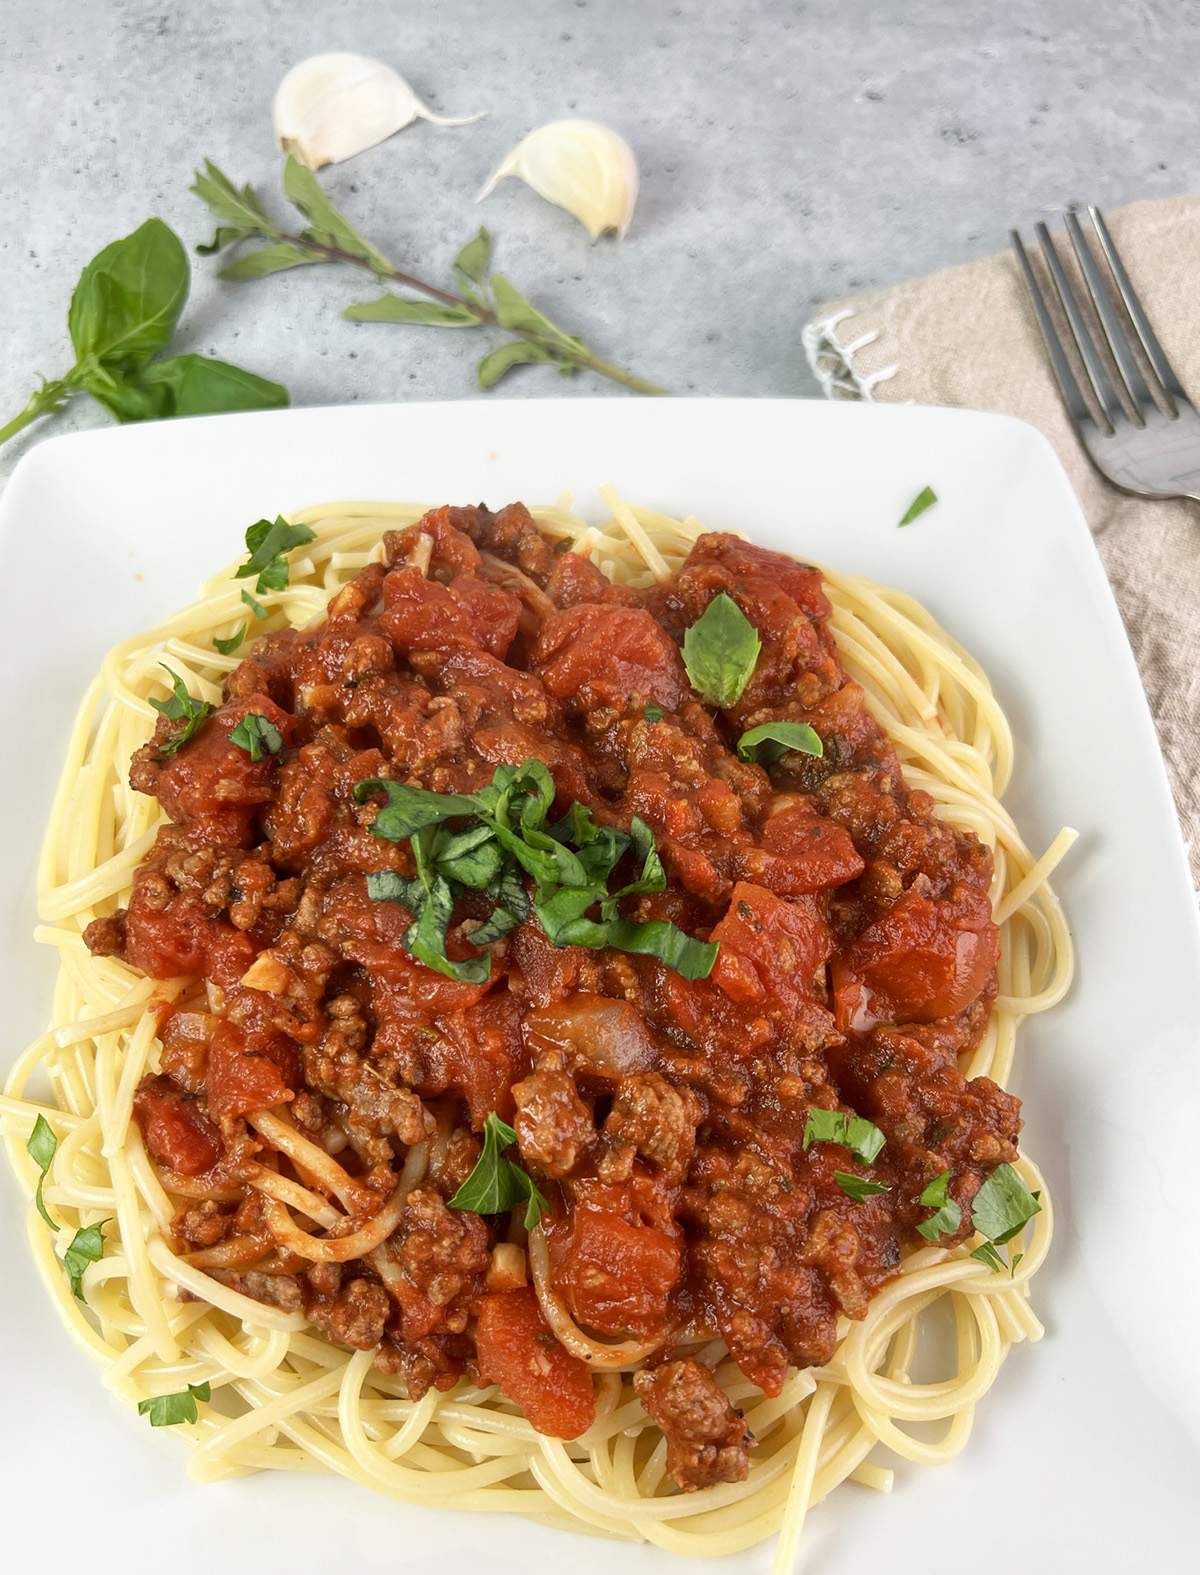 A plate of spaghetti that is topped with low sodium spaghetti meat sauce